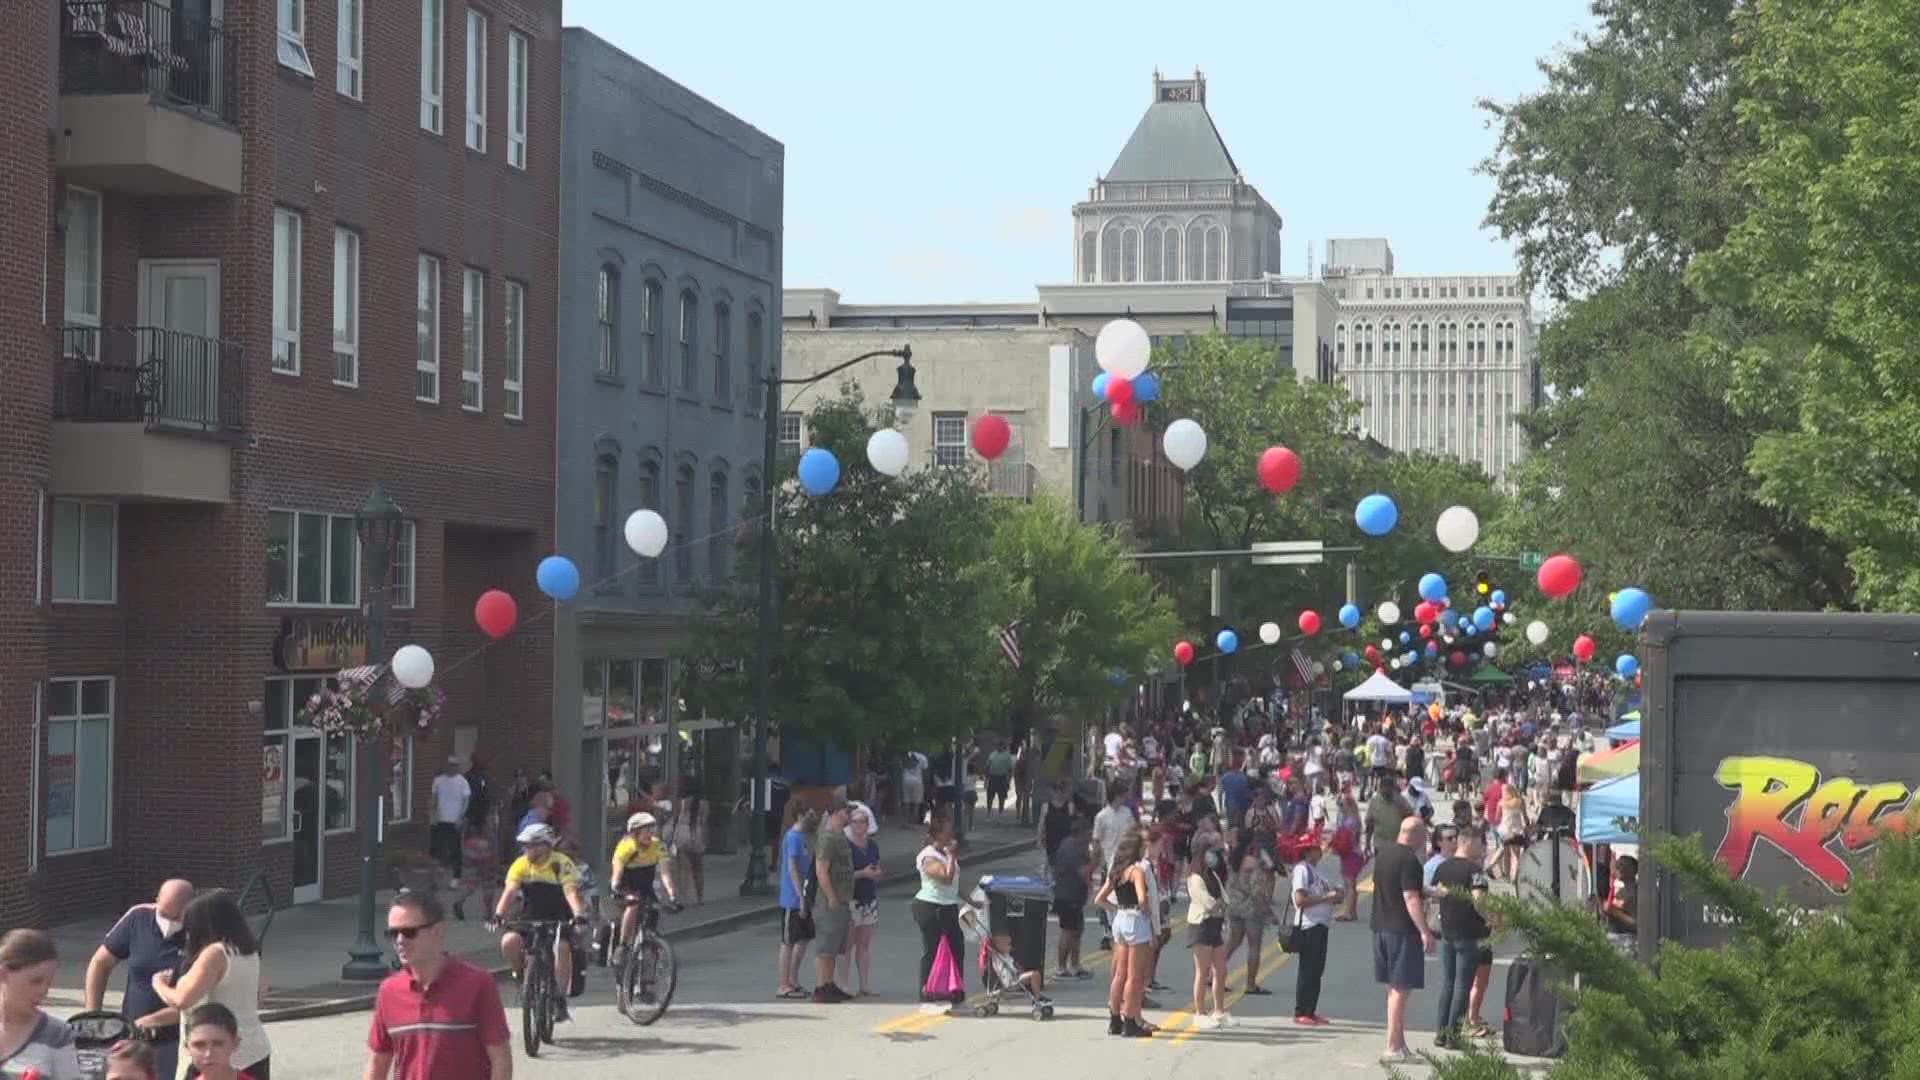 The Annual Fun Fourth Freedom Festival is a day of food, games, live music, and much more.